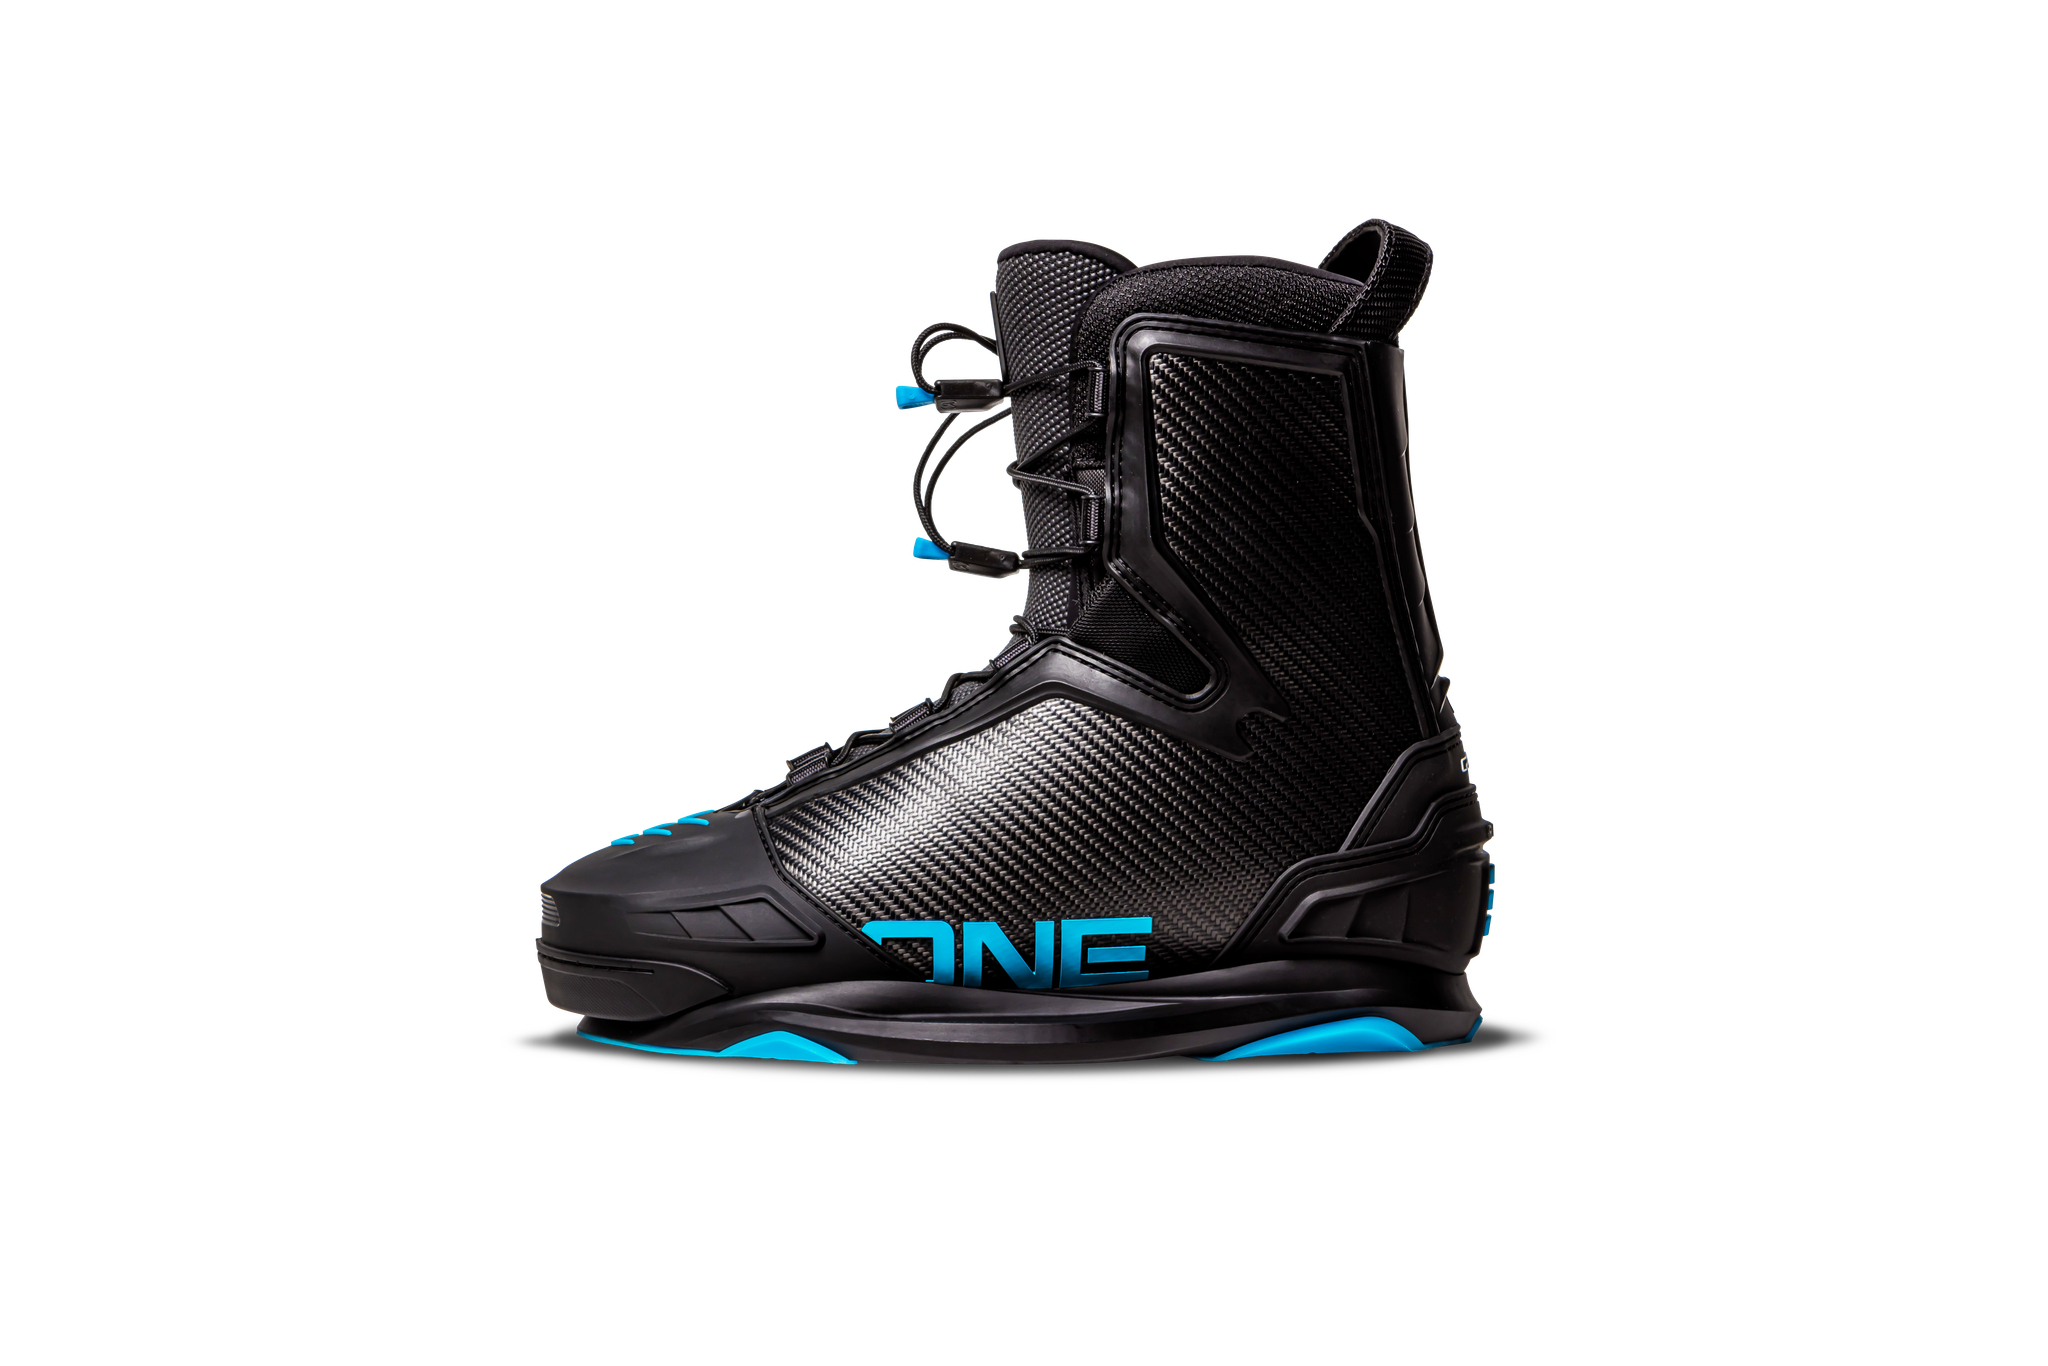 One pair of Ronix 2023 One Carbitex Boots with an Intuition+ heat moldable liner, providing a responsive fit, showcased against a black background.